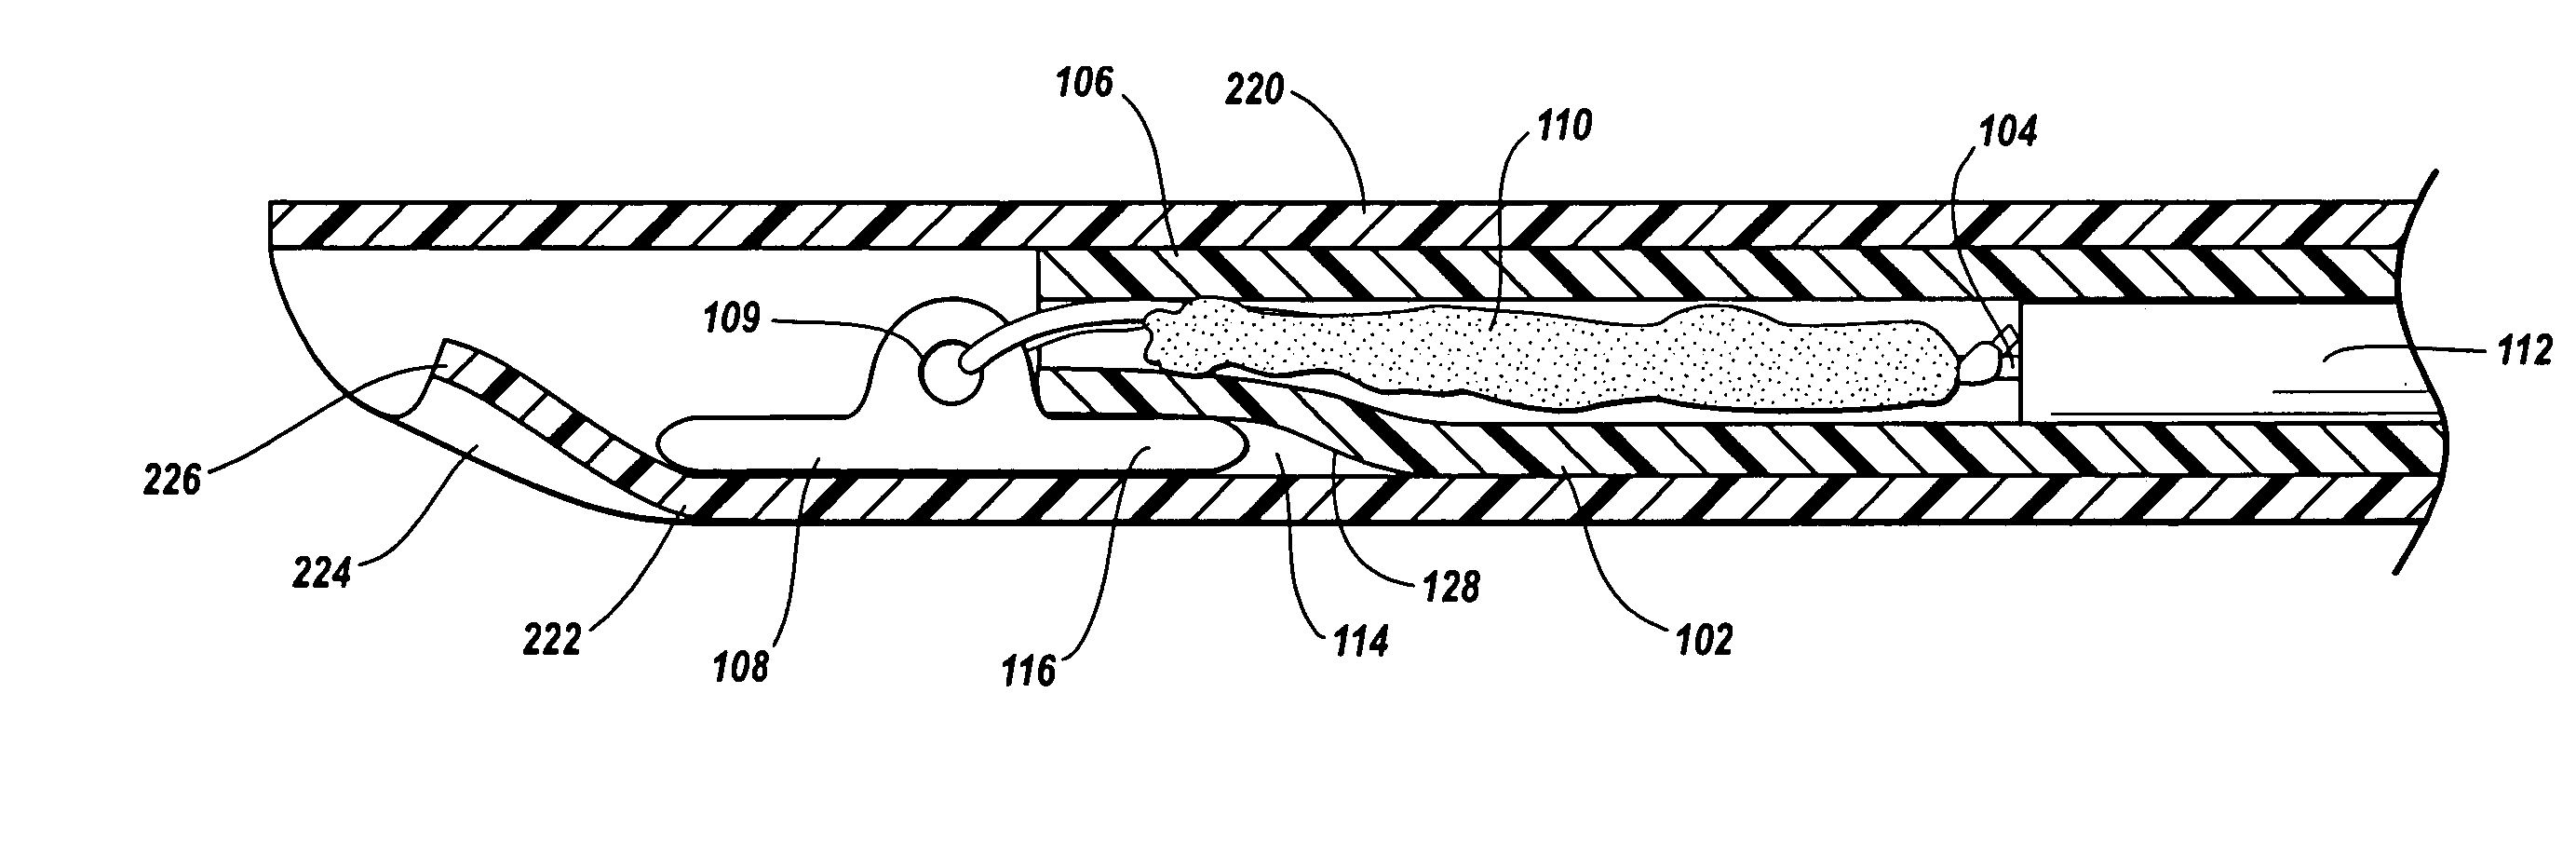 Vascular insertion sheath with stiffened tip